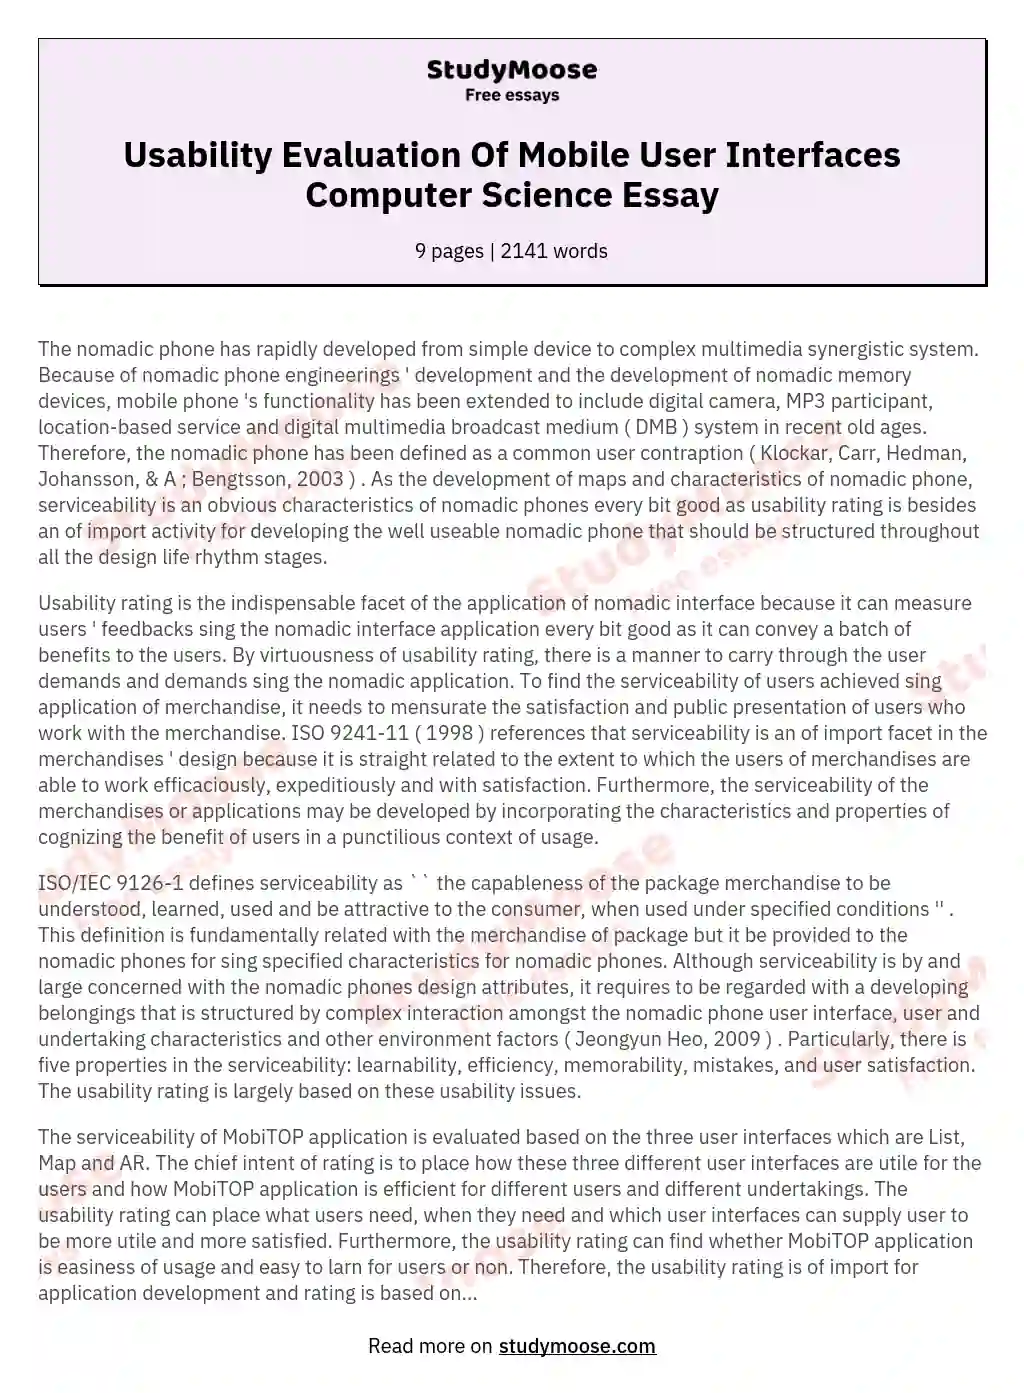 Usability Evaluation Of Mobile User Interfaces Computer Science Essay essay